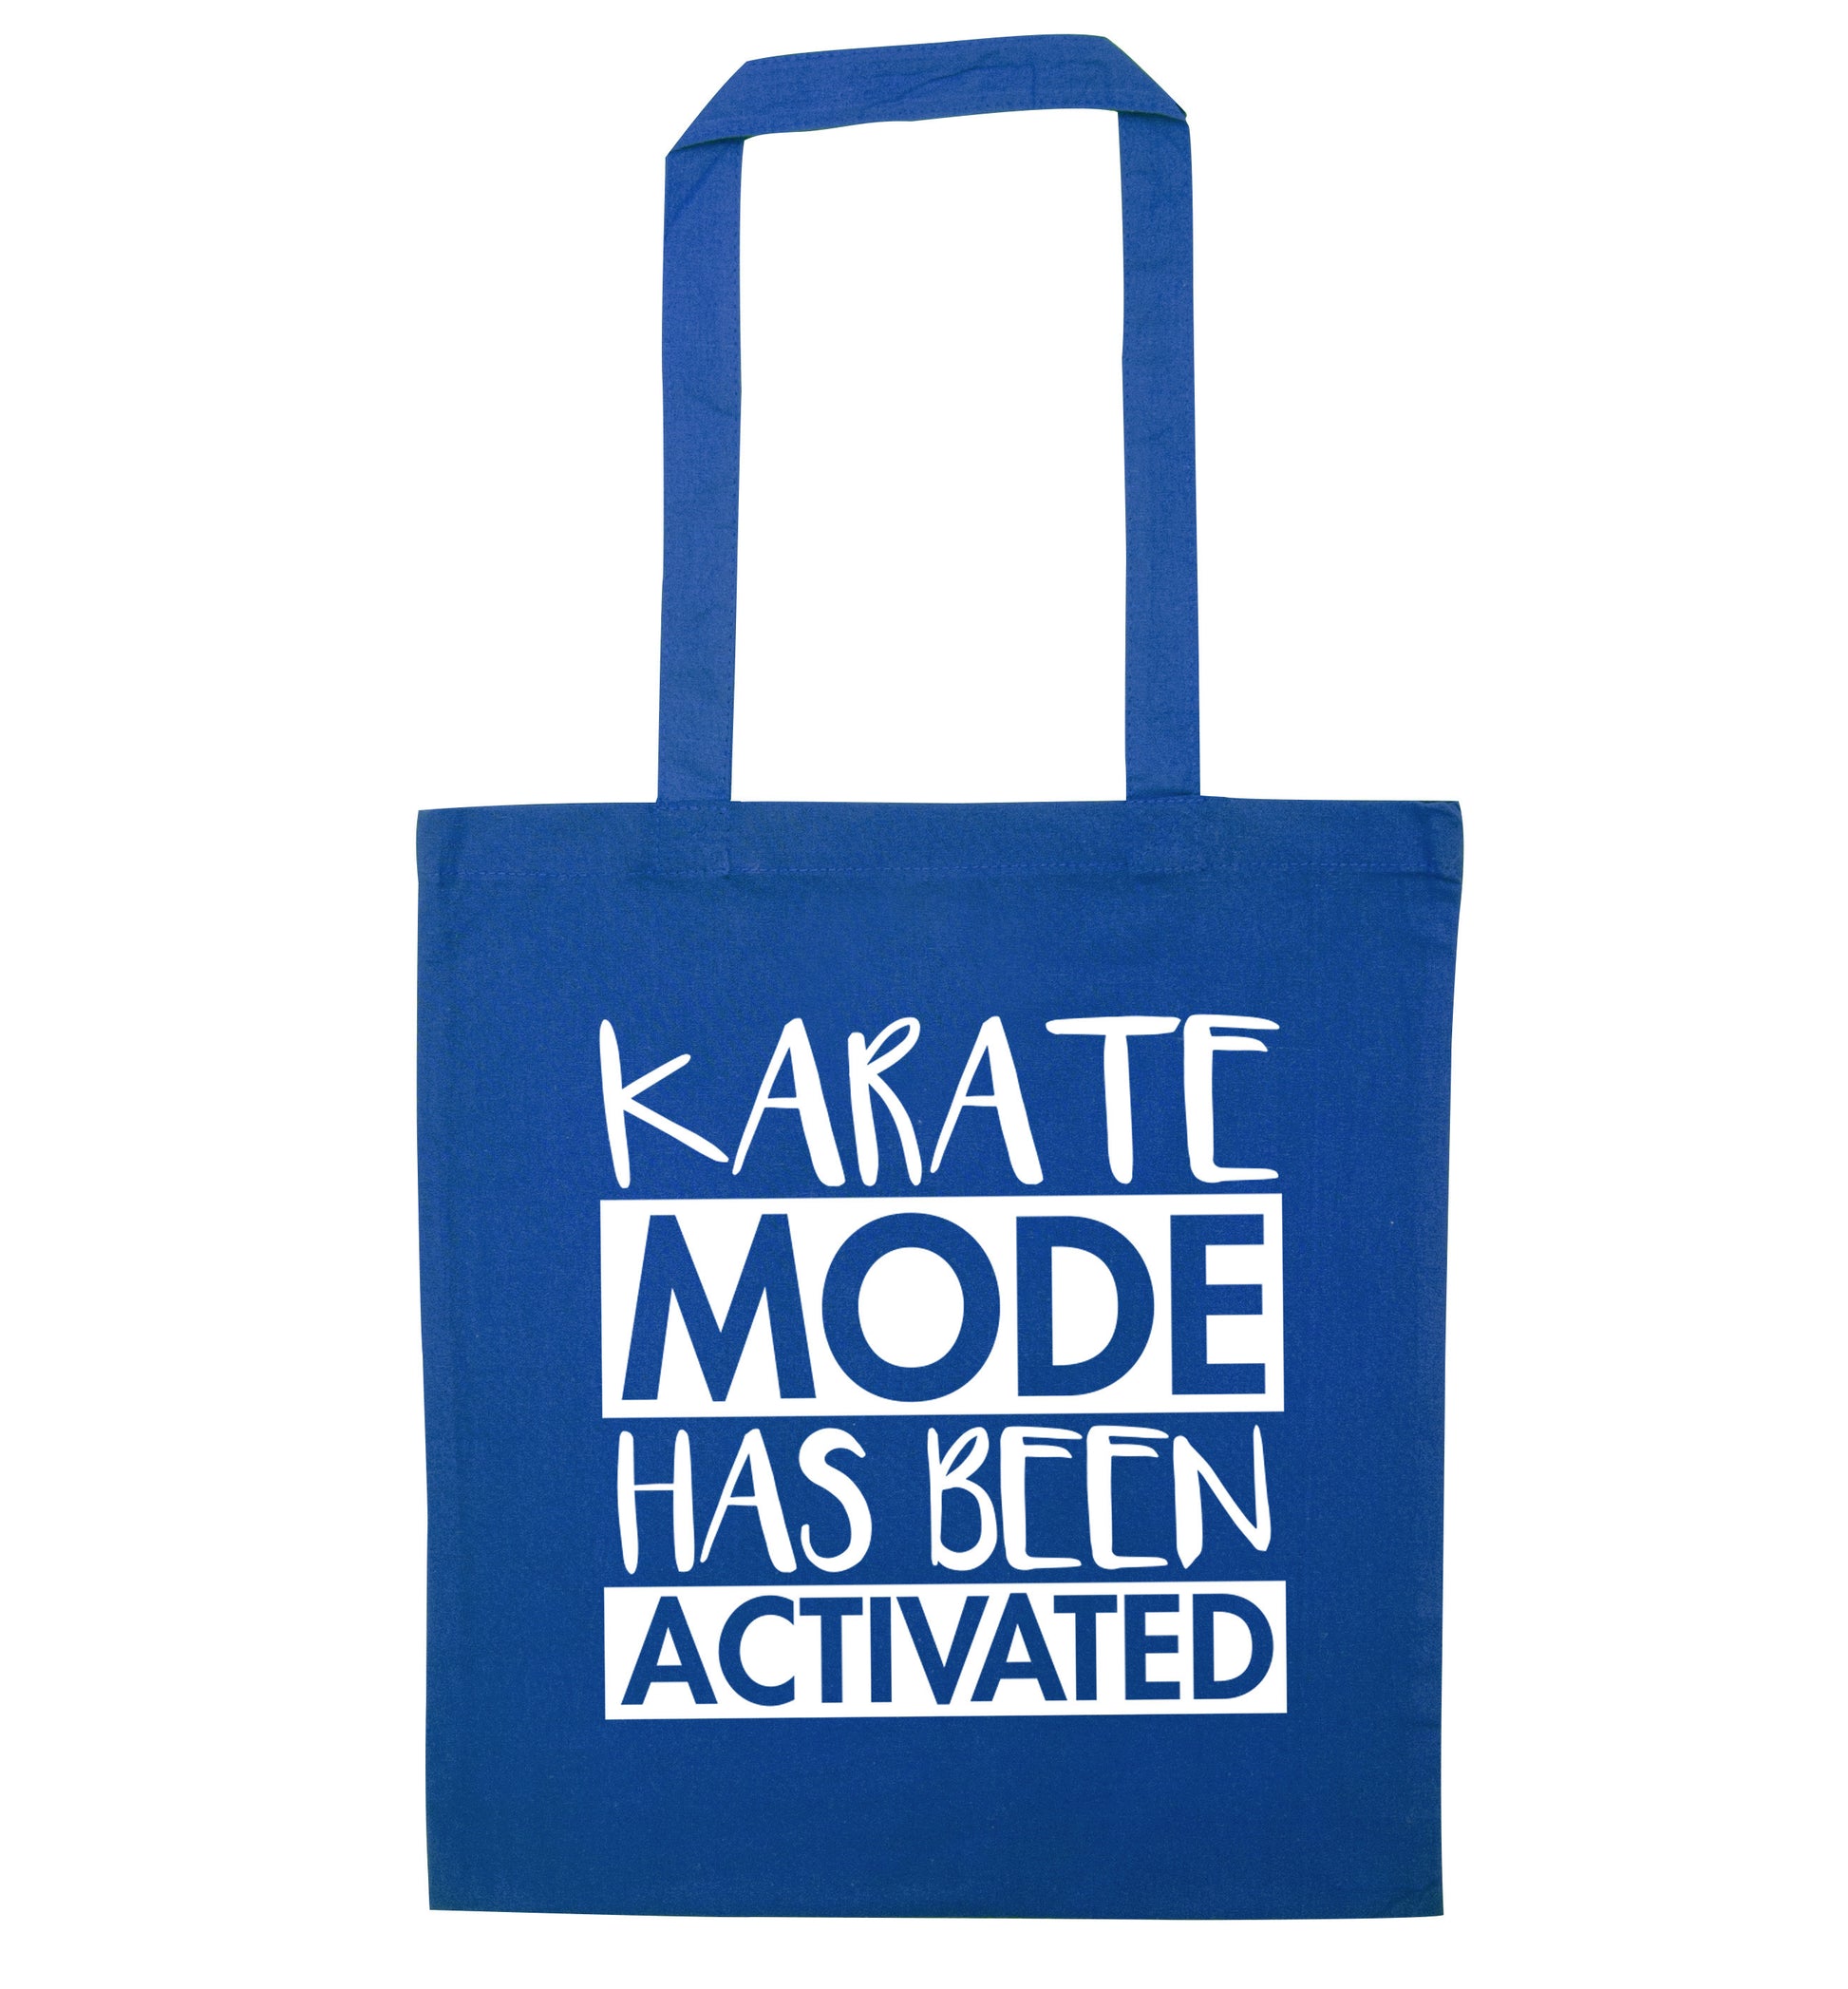 Karate mode activated blue tote bag